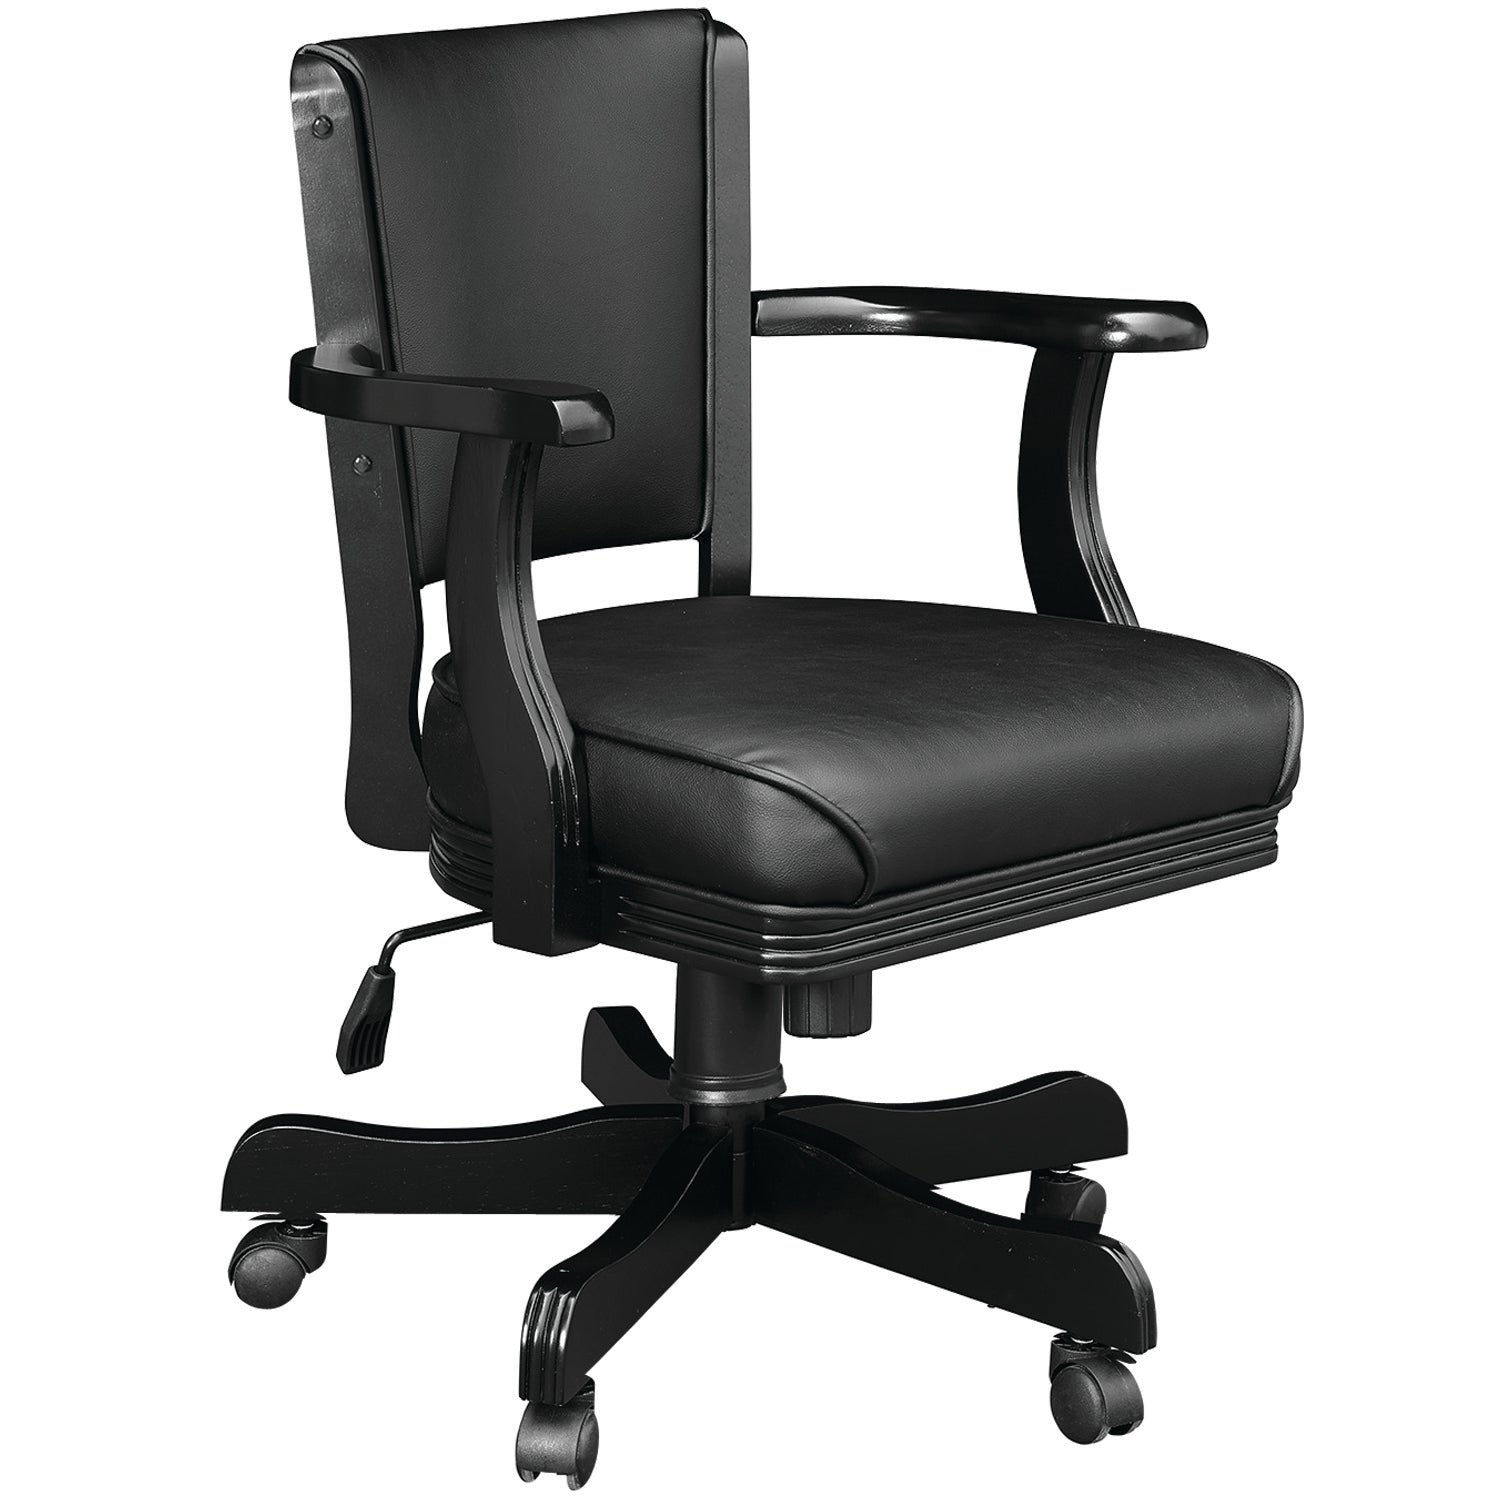 Vinyl padded swivel game chair with arm rests in a black finish.